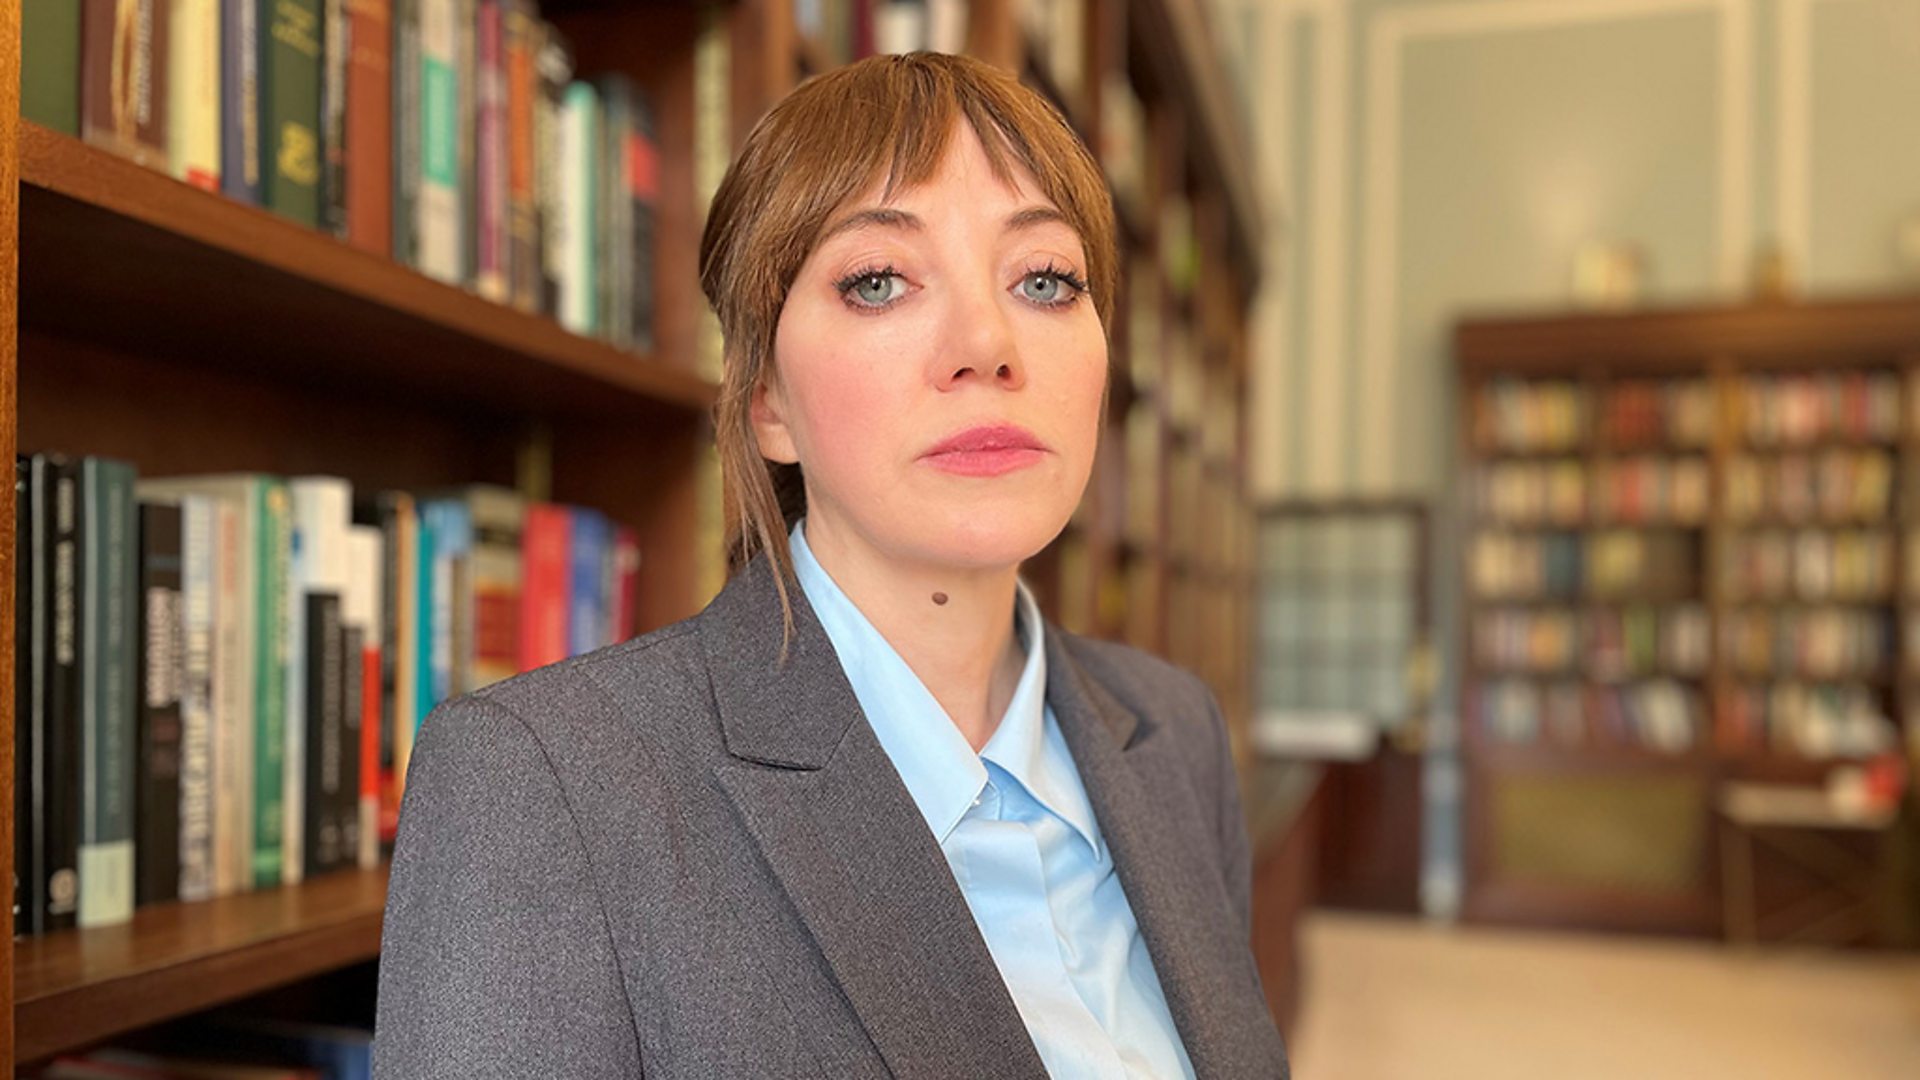 Philomena Cunk returns to BBC Two and BBC iPlayer with brand new series